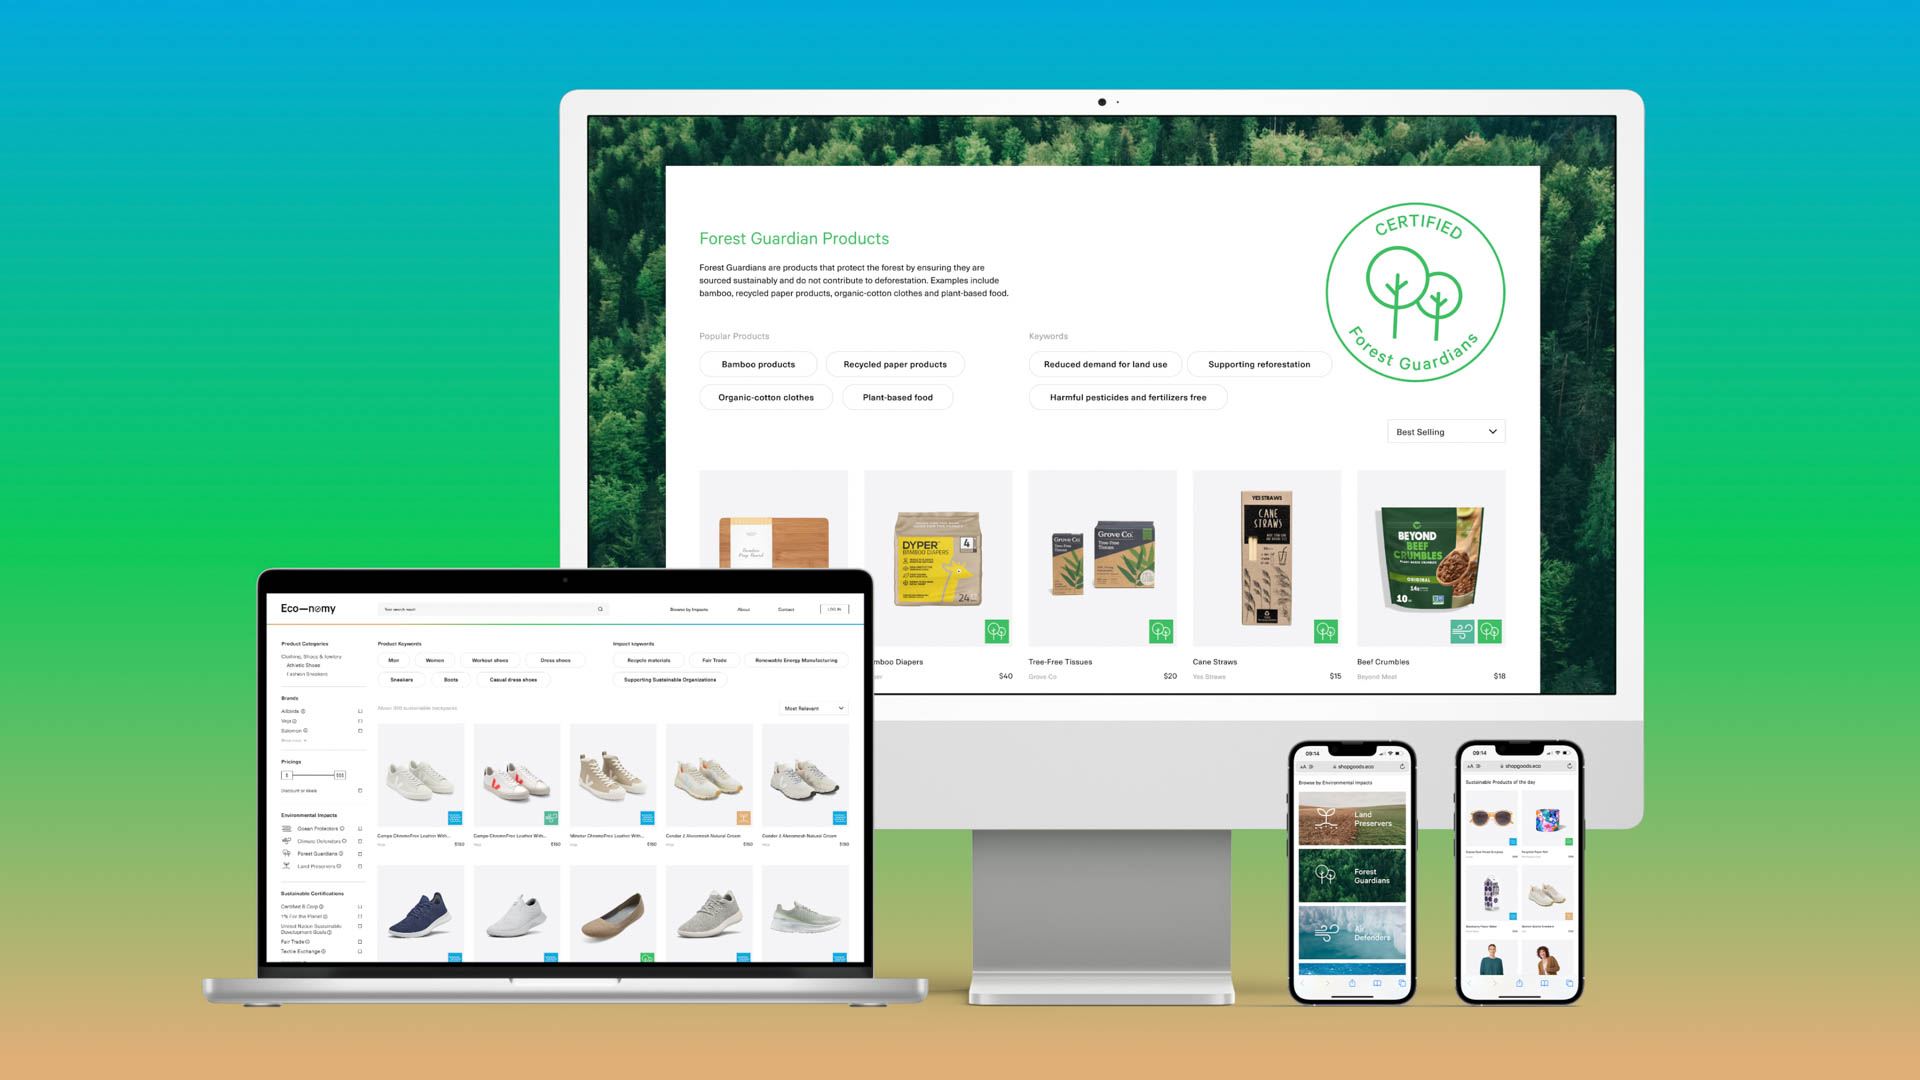 Eco-nomy website showing on laptop, desktop and mobile phone